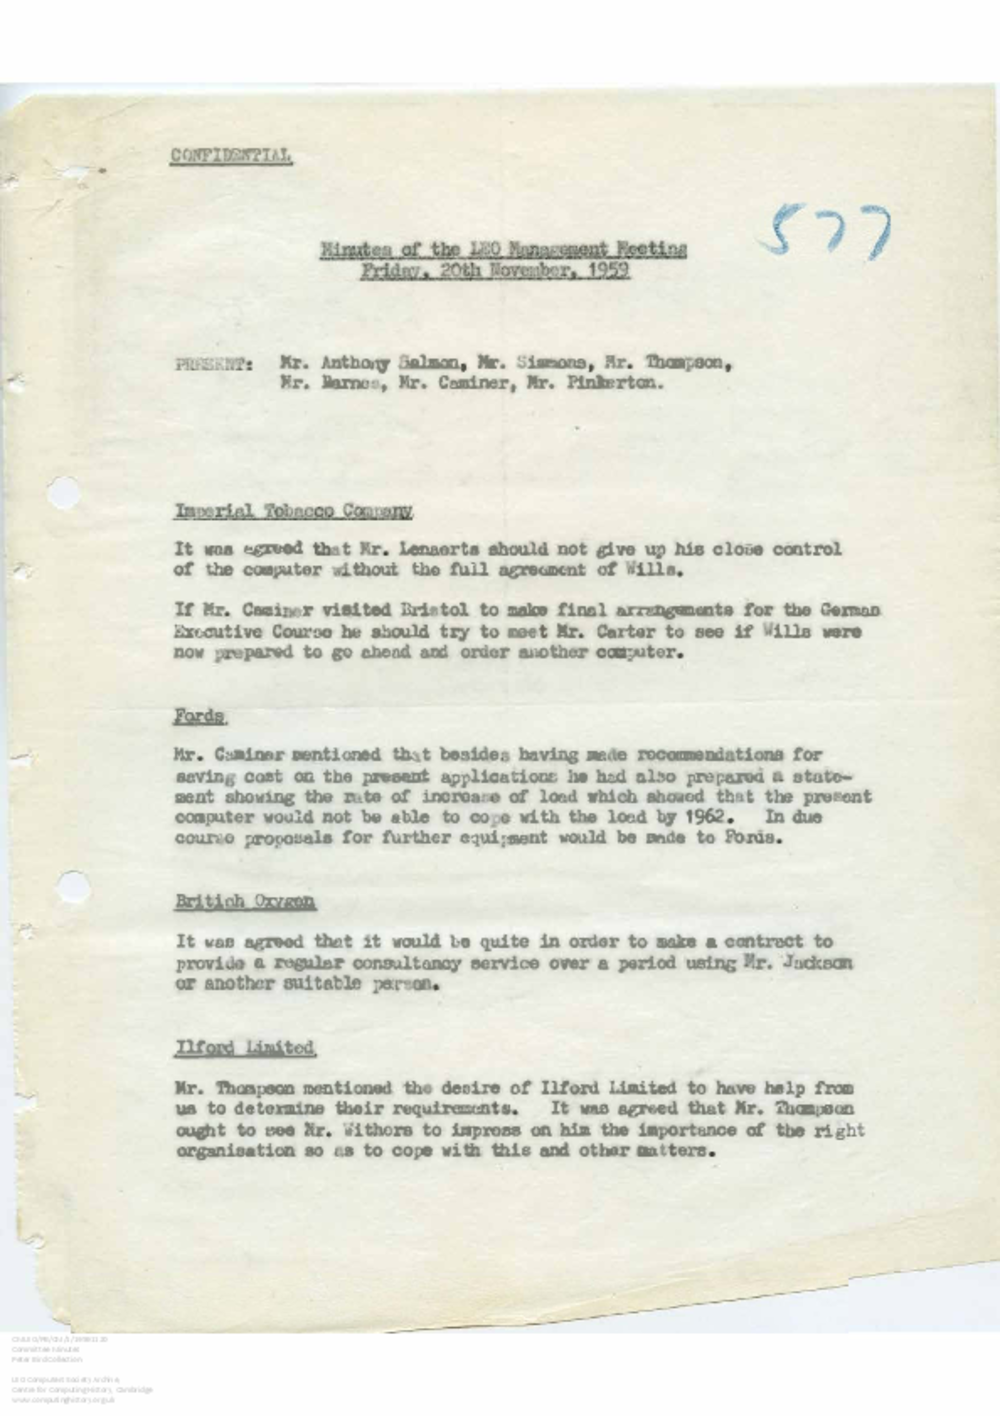 Article: 56051 LEO Management Meeting, 20/11/1959